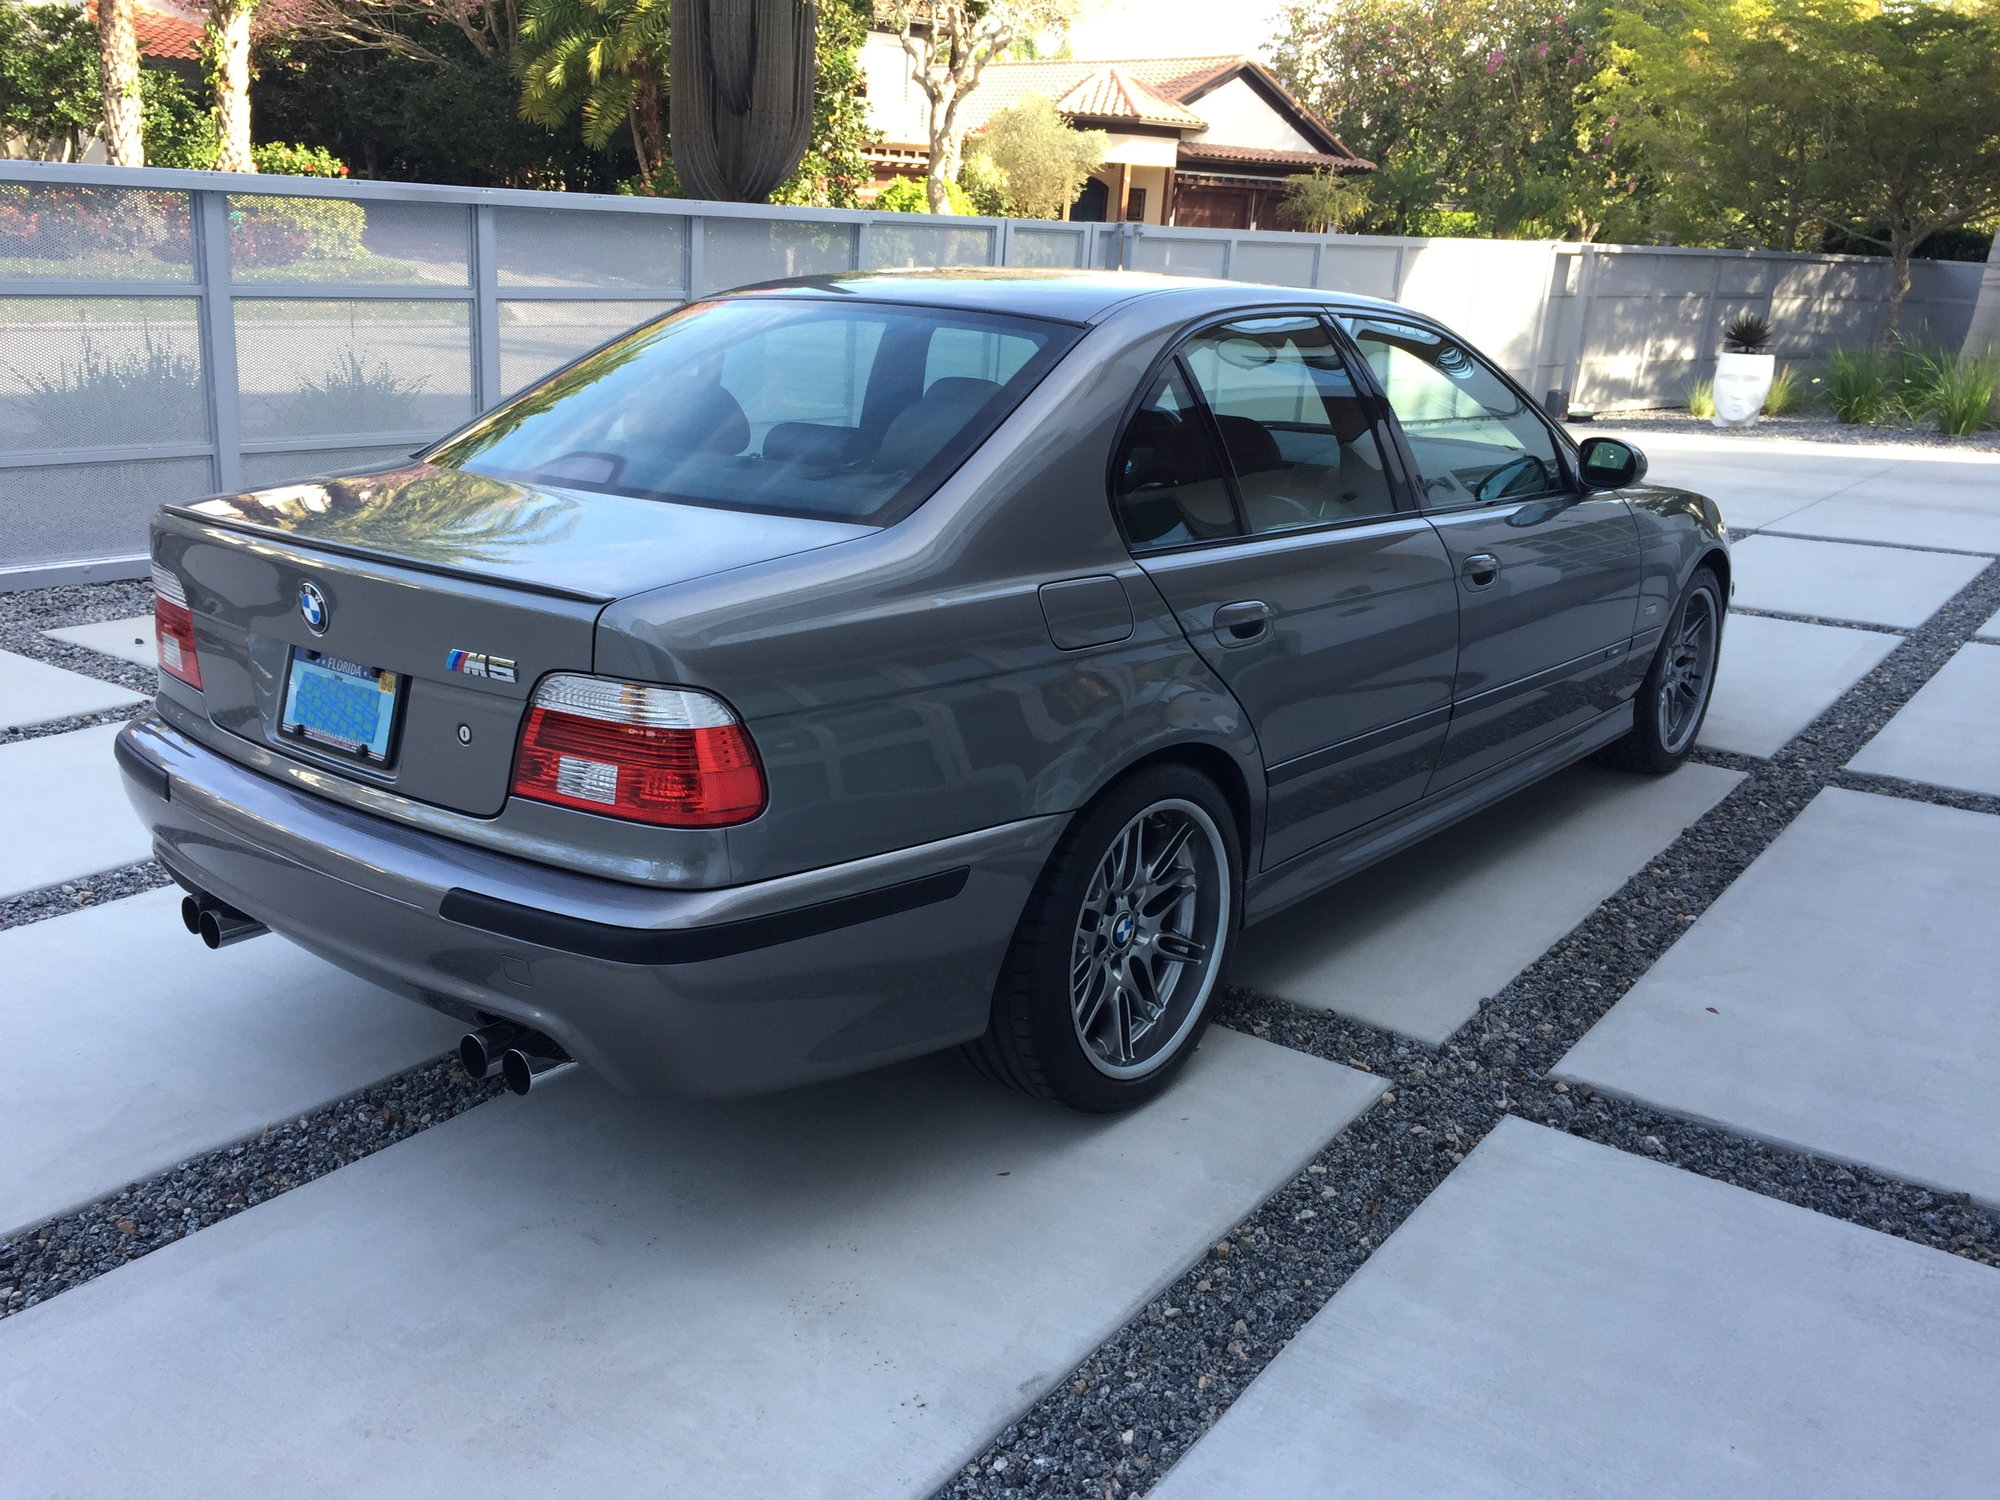 2002 BMW M5 - 2002 BMW E39 M5 Only 11,674 Miles !  Outstanding Stunning Original Stock Condition. - Used - VIN WBSDE93432BZ99753 - 8 cyl - 2WD - Manual - Sedan - Gray - Sarasota, FL 34239, United States